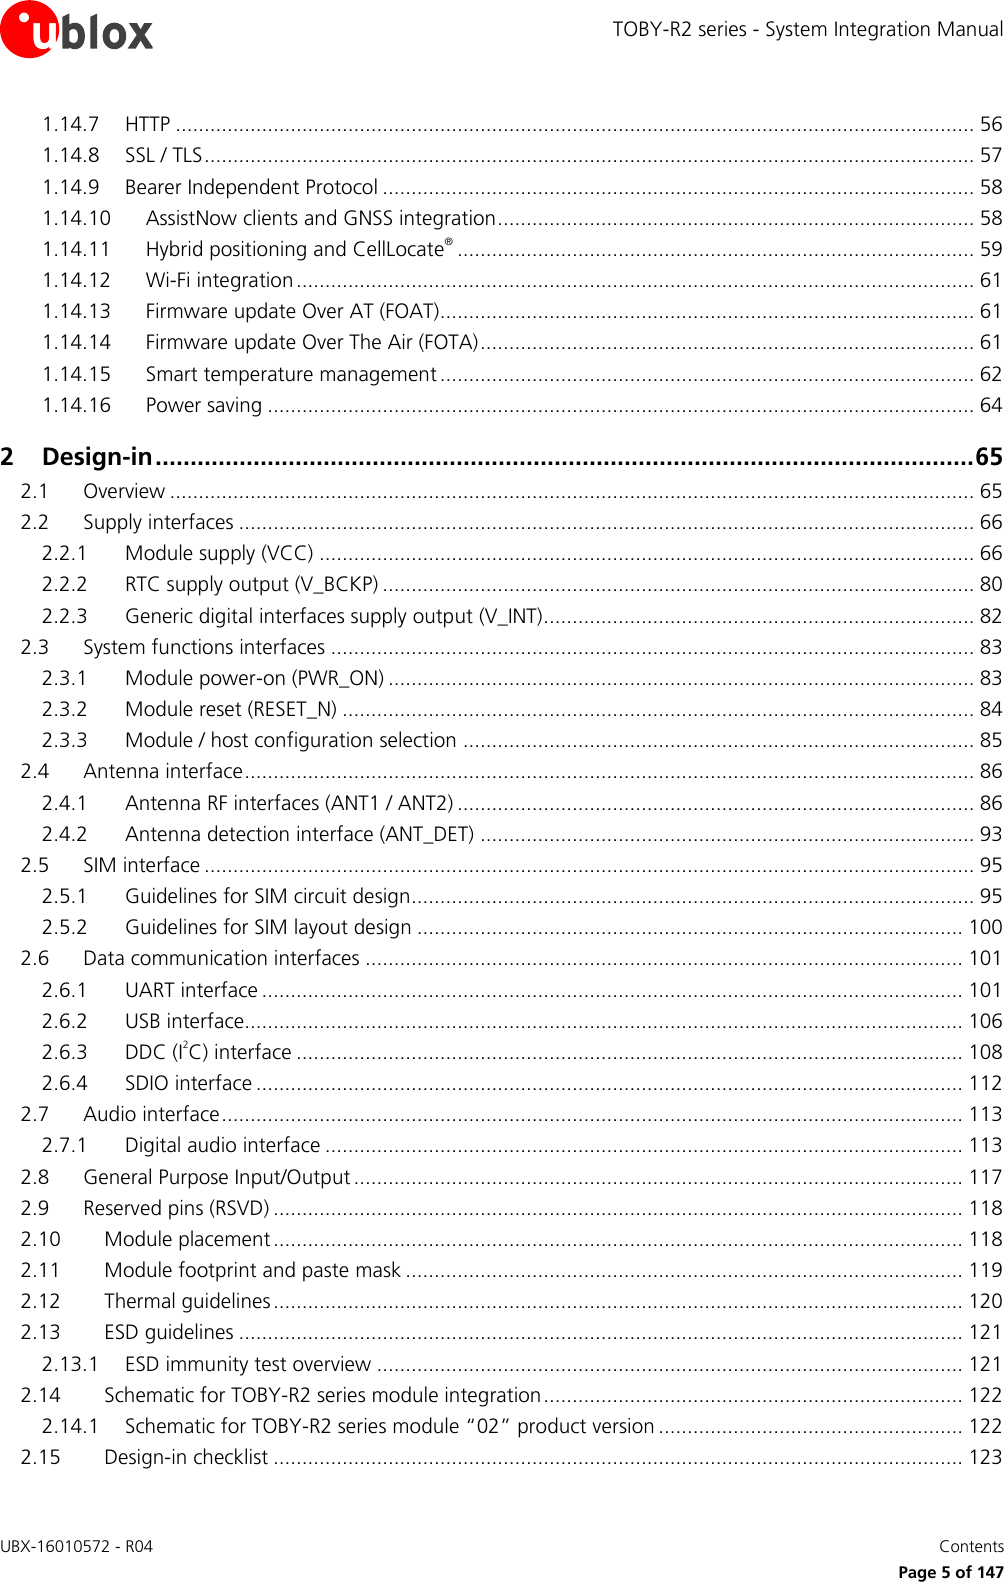 TOBY-R2 series - System Integration Manual UBX-16010572 - R04    Contents     Page 5 of 147 1.14.7 HTTP ........................................................................................................................................... 56 1.14.8 SSL / TLS ...................................................................................................................................... 57 1.14.9 Bearer Independent Protocol ....................................................................................................... 58 1.14.10 AssistNow clients and GNSS integration ................................................................................... 58 1.14.11 Hybrid positioning and CellLocate® .......................................................................................... 59 1.14.12 Wi-Fi integration ...................................................................................................................... 61 1.14.13 Firmware update Over AT (FOAT)............................................................................................. 61 1.14.14 Firmware update Over The Air (FOTA) ...................................................................................... 61 1.14.15 Smart temperature management ............................................................................................. 62 1.14.16 Power saving ........................................................................................................................... 64 2 Design-in ..................................................................................................................... 65 2.1 Overview ............................................................................................................................................ 65 2.2 Supply interfaces ................................................................................................................................ 66 2.2.1 Module supply (VCC) .................................................................................................................. 66 2.2.2 RTC supply output (V_BCKP) ....................................................................................................... 80 2.2.3 Generic digital interfaces supply output (V_INT) ........................................................................... 82 2.3 System functions interfaces ................................................................................................................ 83 2.3.1 Module power-on (PWR_ON) ...................................................................................................... 83 2.3.2 Module reset (RESET_N) .............................................................................................................. 84 2.3.3 Module / host configuration selection ......................................................................................... 85 2.4 Antenna interface ............................................................................................................................... 86 2.4.1 Antenna RF interfaces (ANT1 / ANT2) .......................................................................................... 86 2.4.2 Antenna detection interface (ANT_DET) ...................................................................................... 93 2.5 SIM interface ...................................................................................................................................... 95 2.5.1 Guidelines for SIM circuit design.................................................................................................. 95 2.5.2 Guidelines for SIM layout design ............................................................................................... 100 2.6 Data communication interfaces ........................................................................................................ 101 2.6.1 UART interface .......................................................................................................................... 101 2.6.2 USB interface............................................................................................................................. 106 2.6.3 DDC (I2C) interface .................................................................................................................... 108 2.6.4 SDIO interface ........................................................................................................................... 112 2.7 Audio interface ................................................................................................................................. 113 2.7.1 Digital audio interface ............................................................................................................... 113 2.8 General Purpose Input/Output .......................................................................................................... 117 2.9 Reserved pins (RSVD) ........................................................................................................................ 118 2.10 Module placement ........................................................................................................................ 118 2.11 Module footprint and paste mask ................................................................................................. 119 2.12 Thermal guidelines ........................................................................................................................ 120 2.13 ESD guidelines .............................................................................................................................. 121 2.13.1 ESD immunity test overview ...................................................................................................... 121 2.14 Schematic for TOBY-R2 series module integration ......................................................................... 122 2.14.1 Schematic for TOBY-R2 series module “02” product version ..................................................... 122 2.15 Design-in checklist ........................................................................................................................ 123 